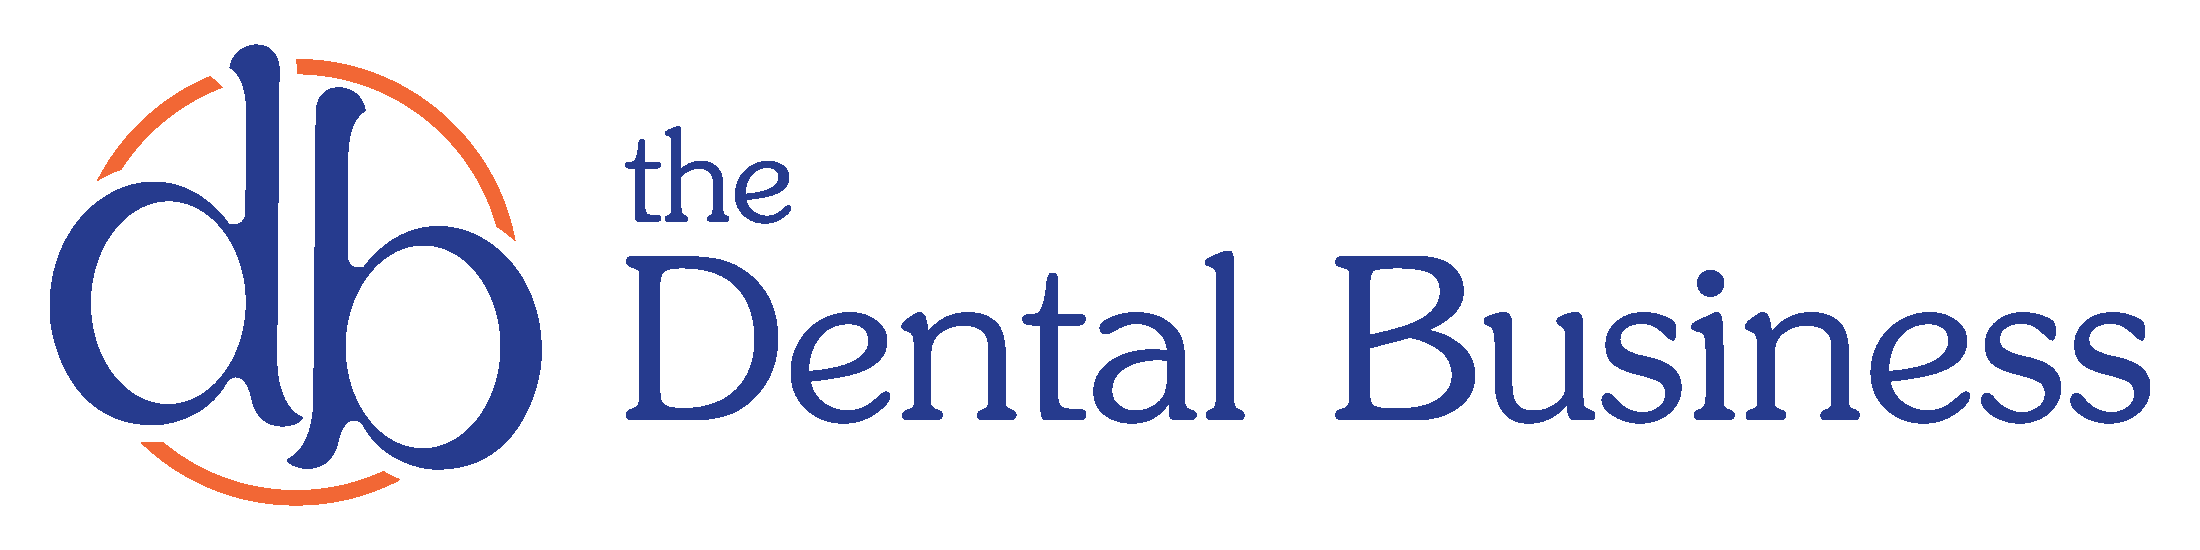 The Dental Business